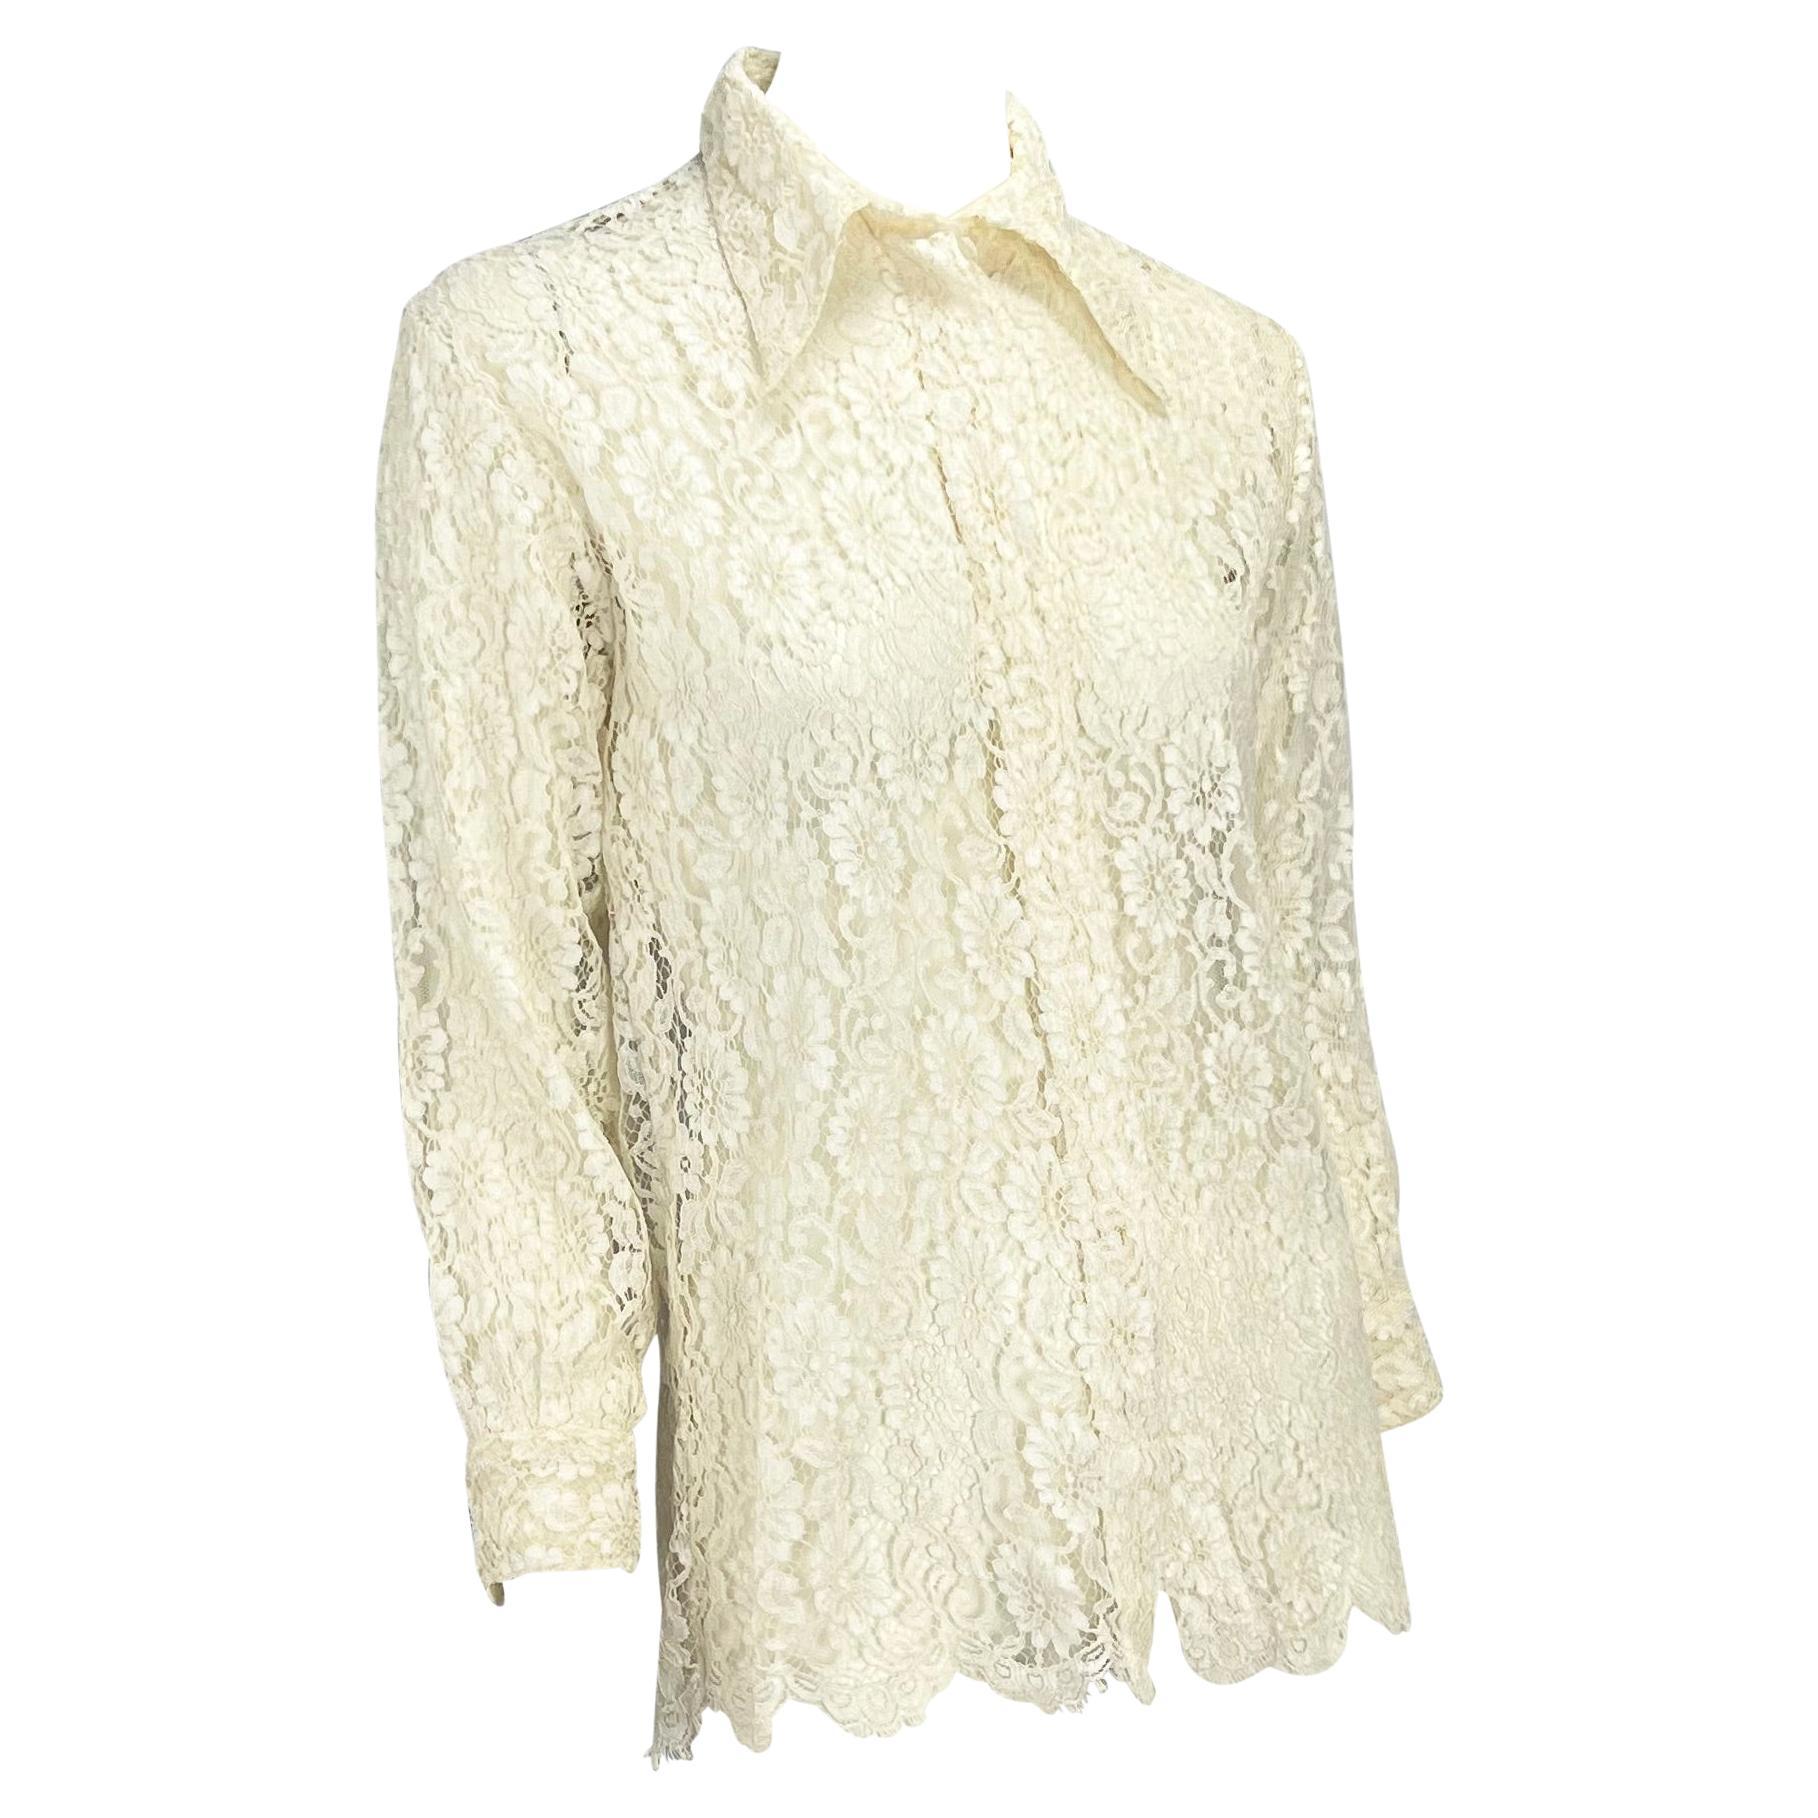 S/S 1994 Gianni Versace Couture Sheer White Lace Button Up Medusa Top For Sale 2